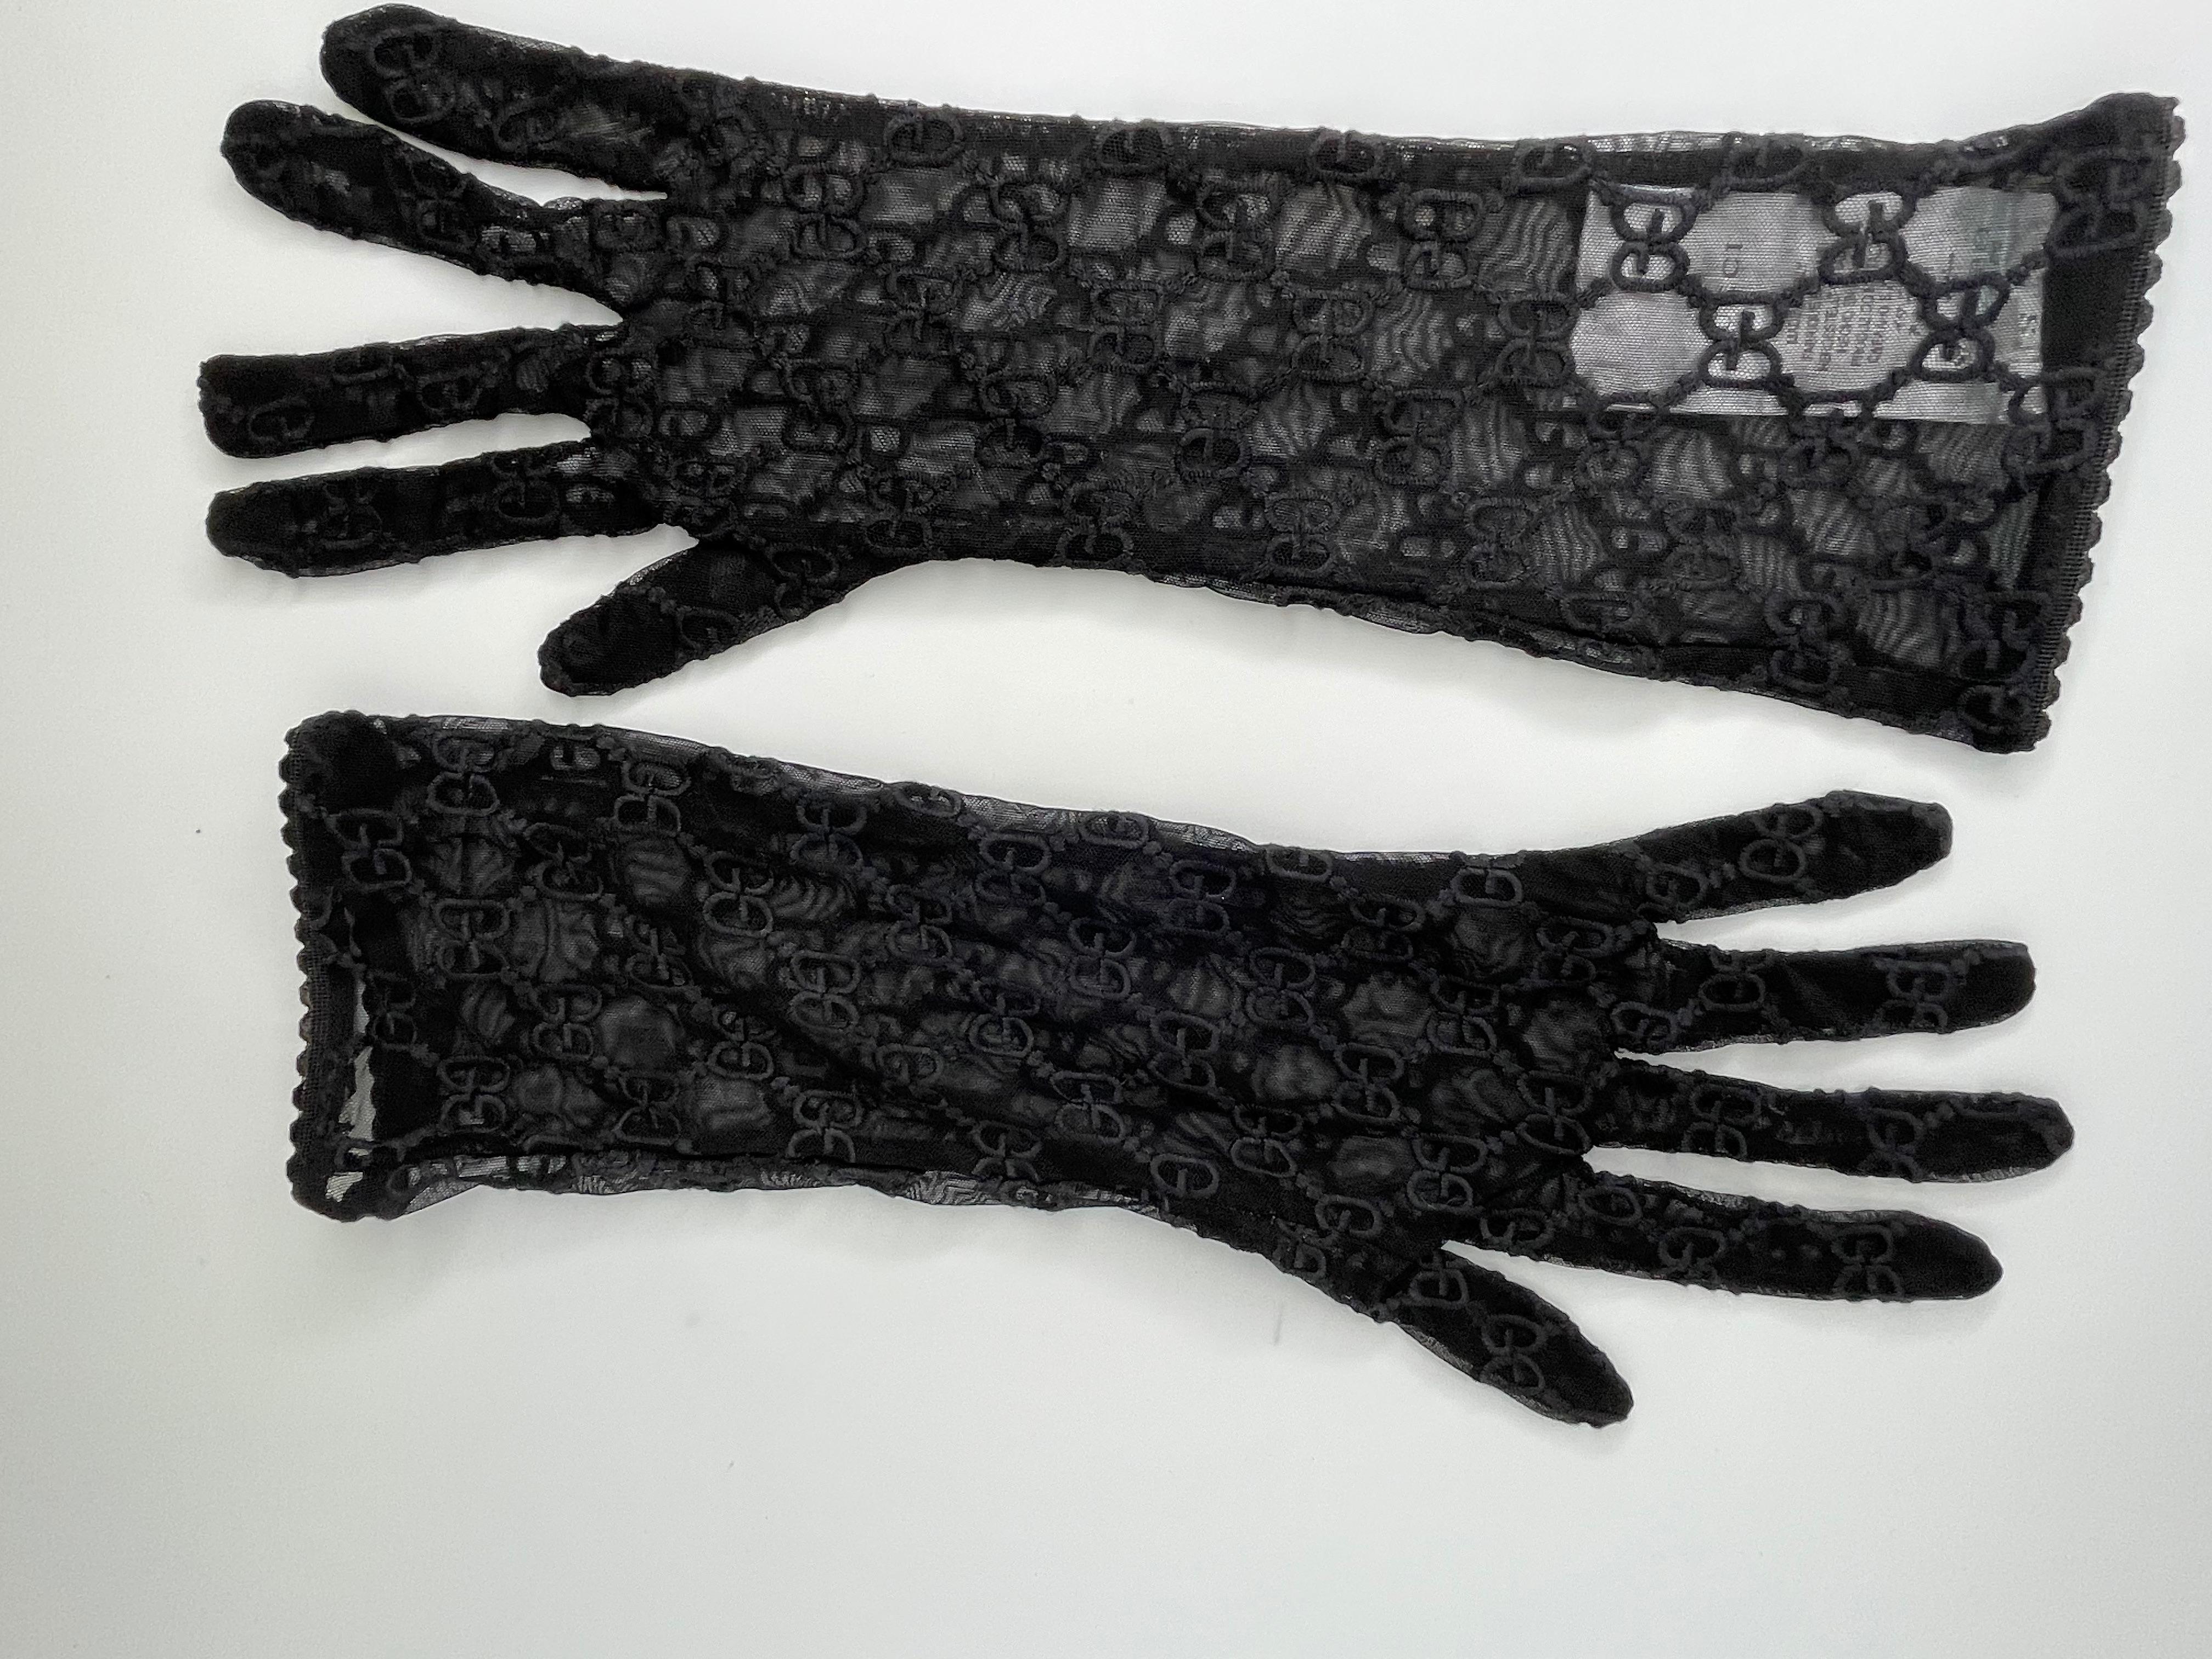 Developed in a new, delicate variation, the historical GG motif from the 1970s is embroidered onto a pair of black tulle gloves.

COLOR: Black
MATERIAL: 73% polyamide 27% elastane; 100% polyester (embroidery)
ITEM CODE: 432086
SIZE: Small